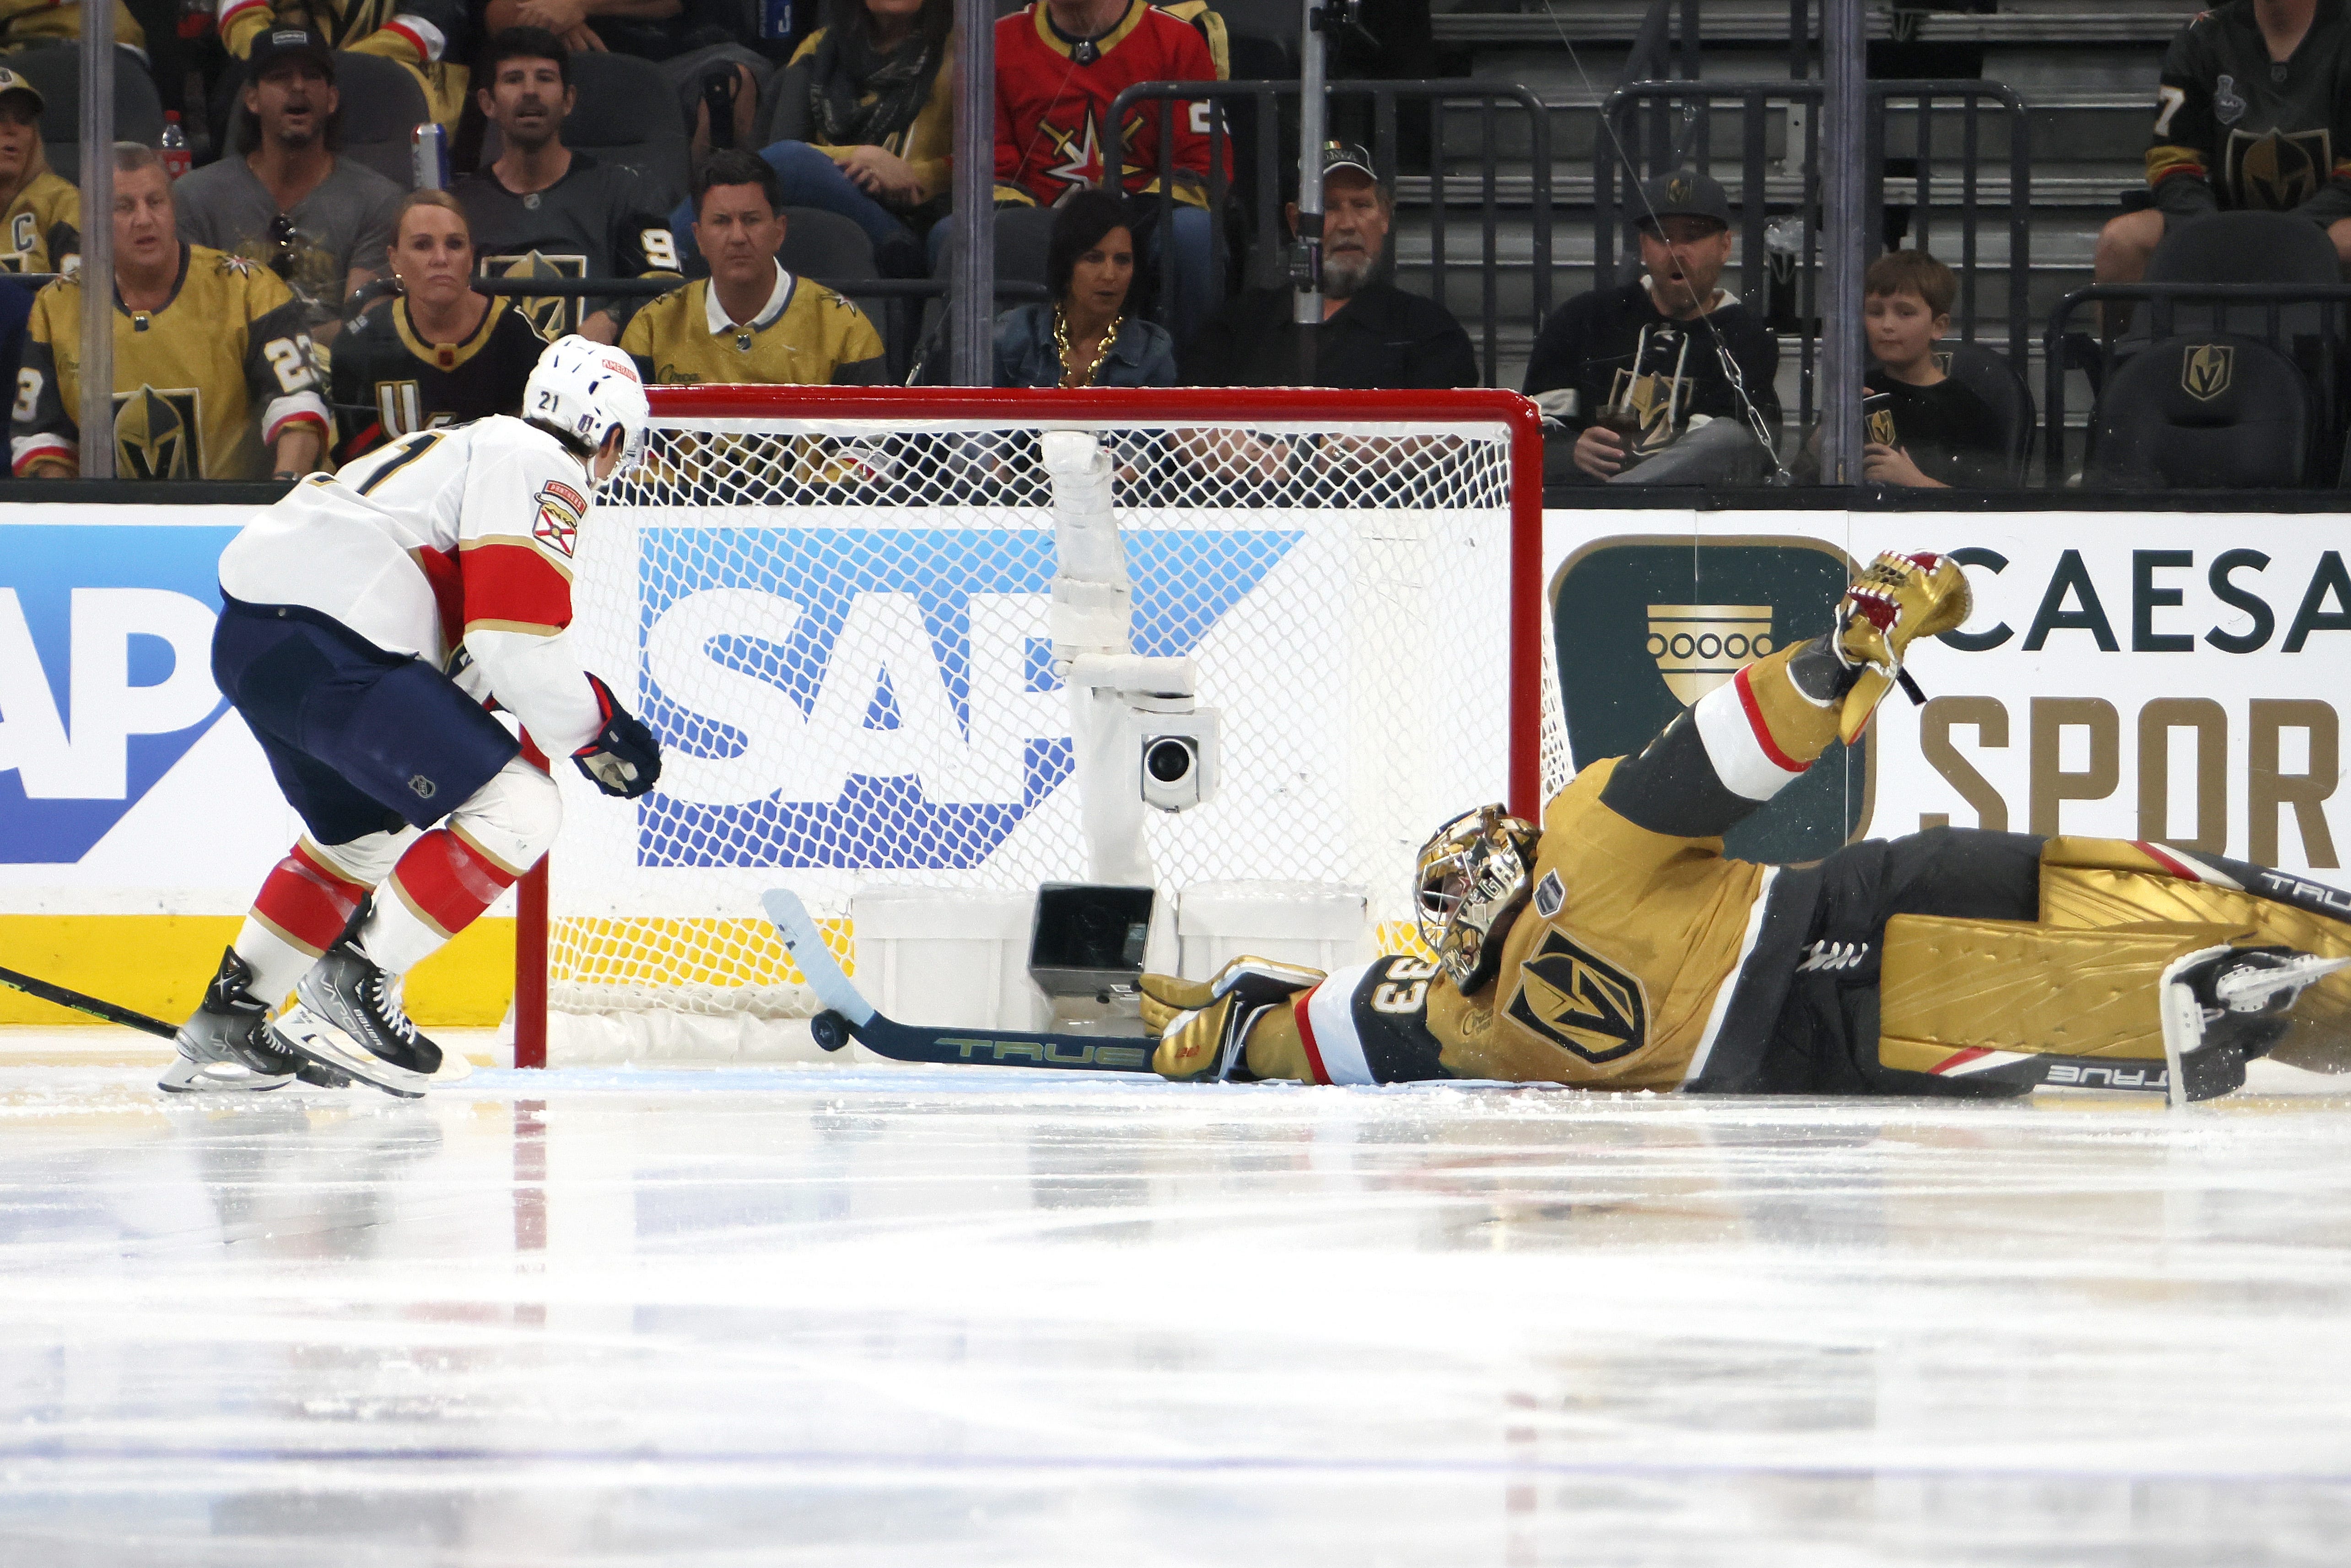 Golden Knights' Adin Hill makes save of the playoffs as Vegas wins Game 1 vs. Panthers